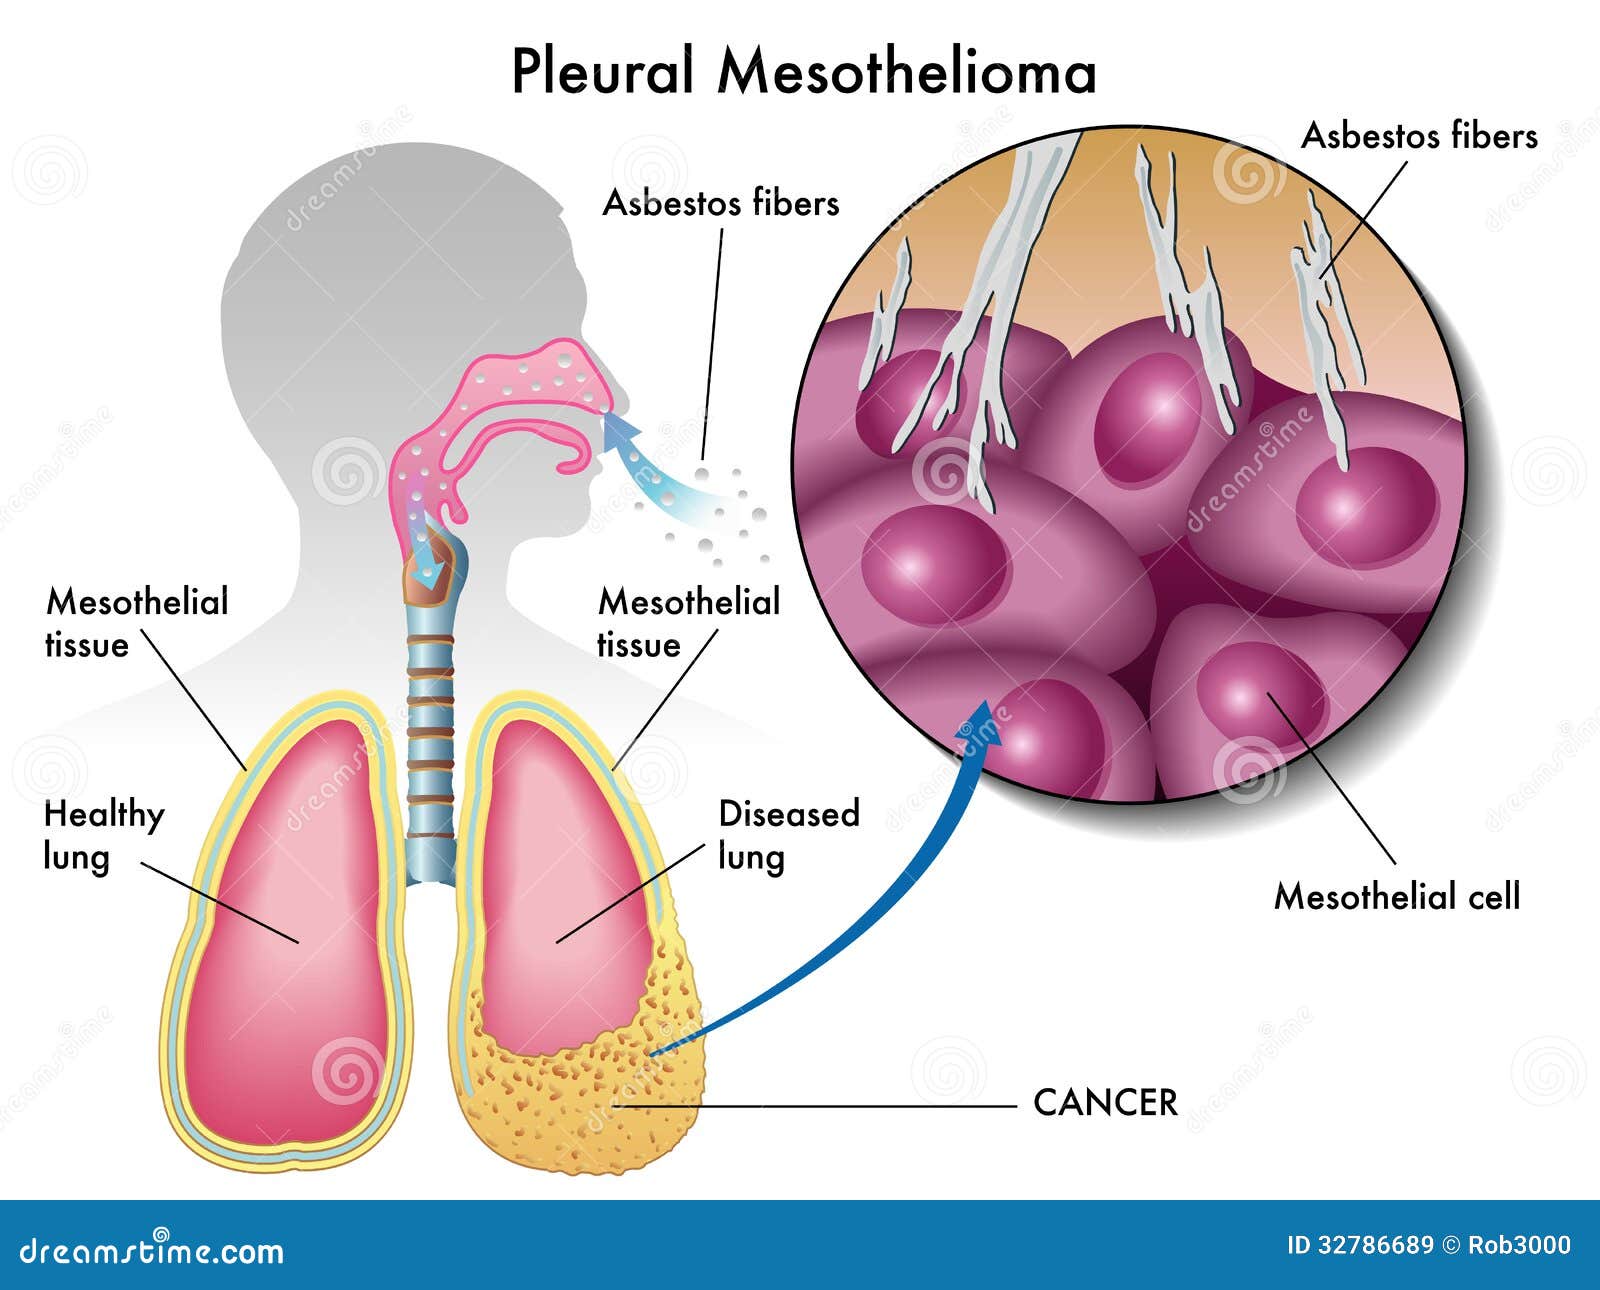 is mesothelioma cancer curable